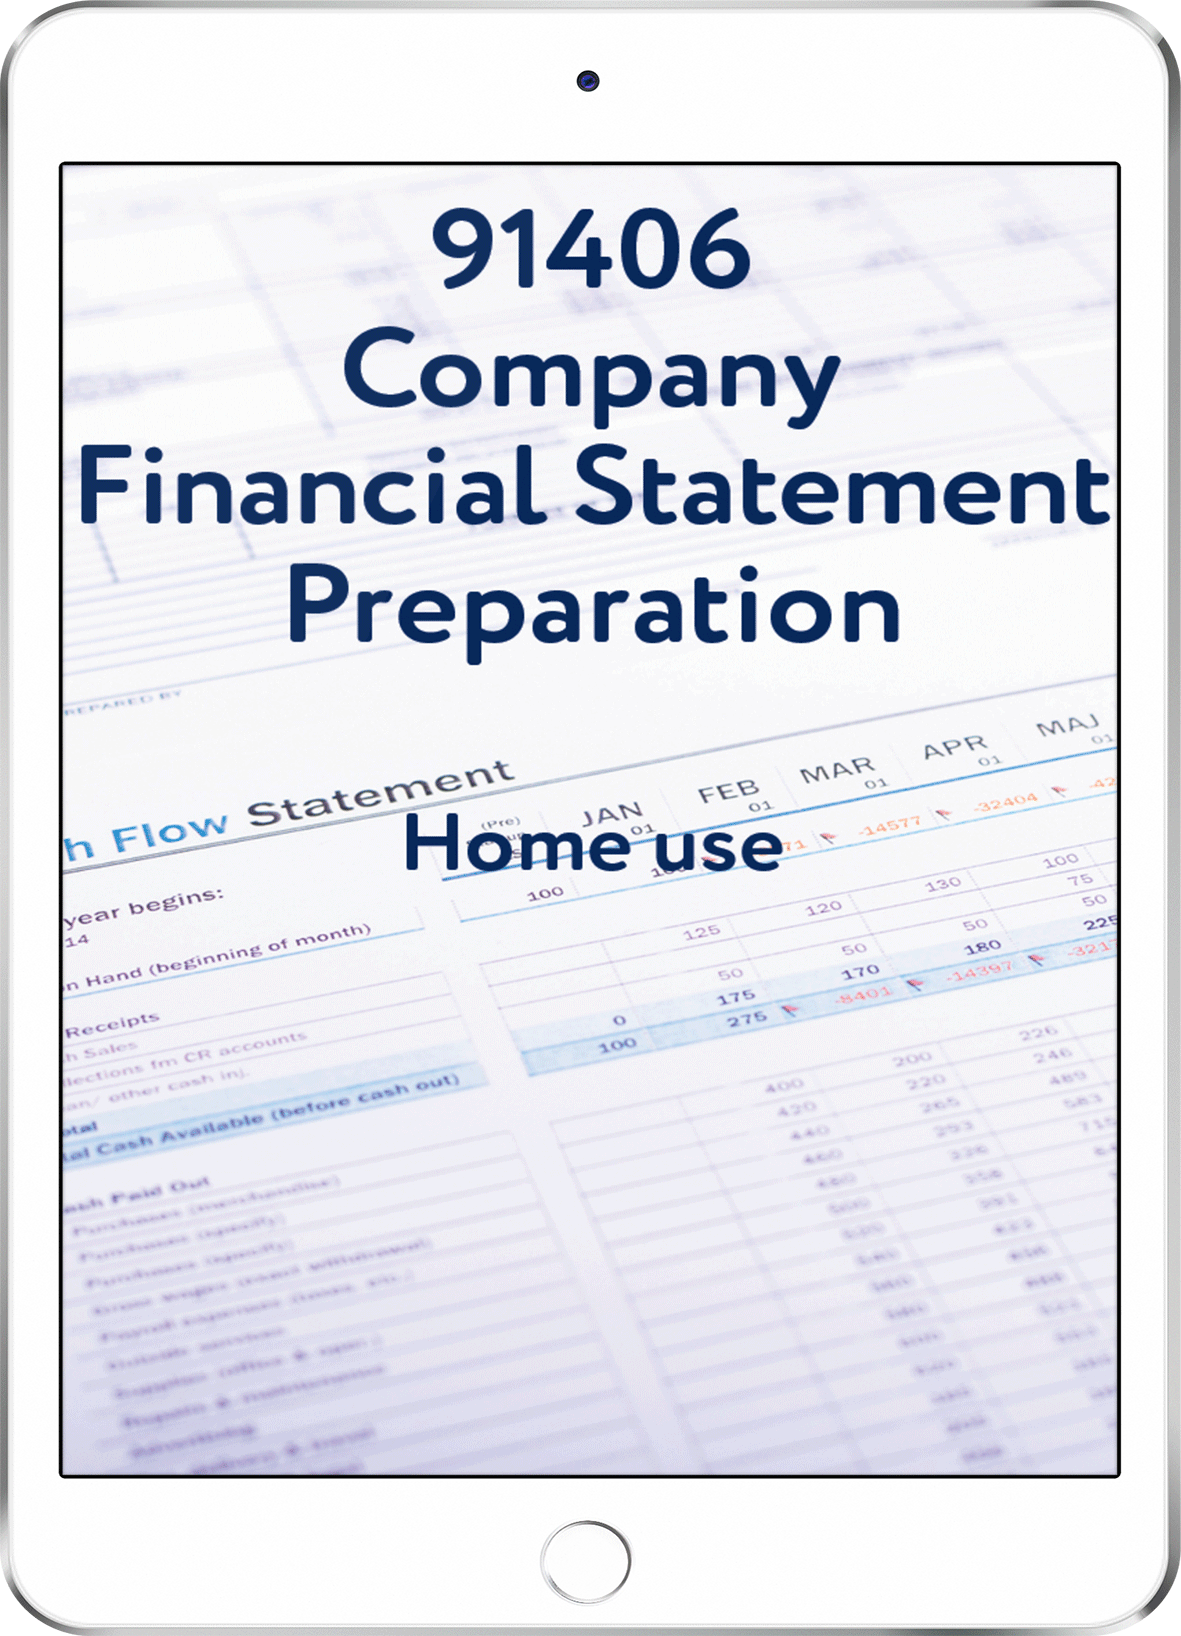 91406 Company Financial Statement Preparation - Home Use